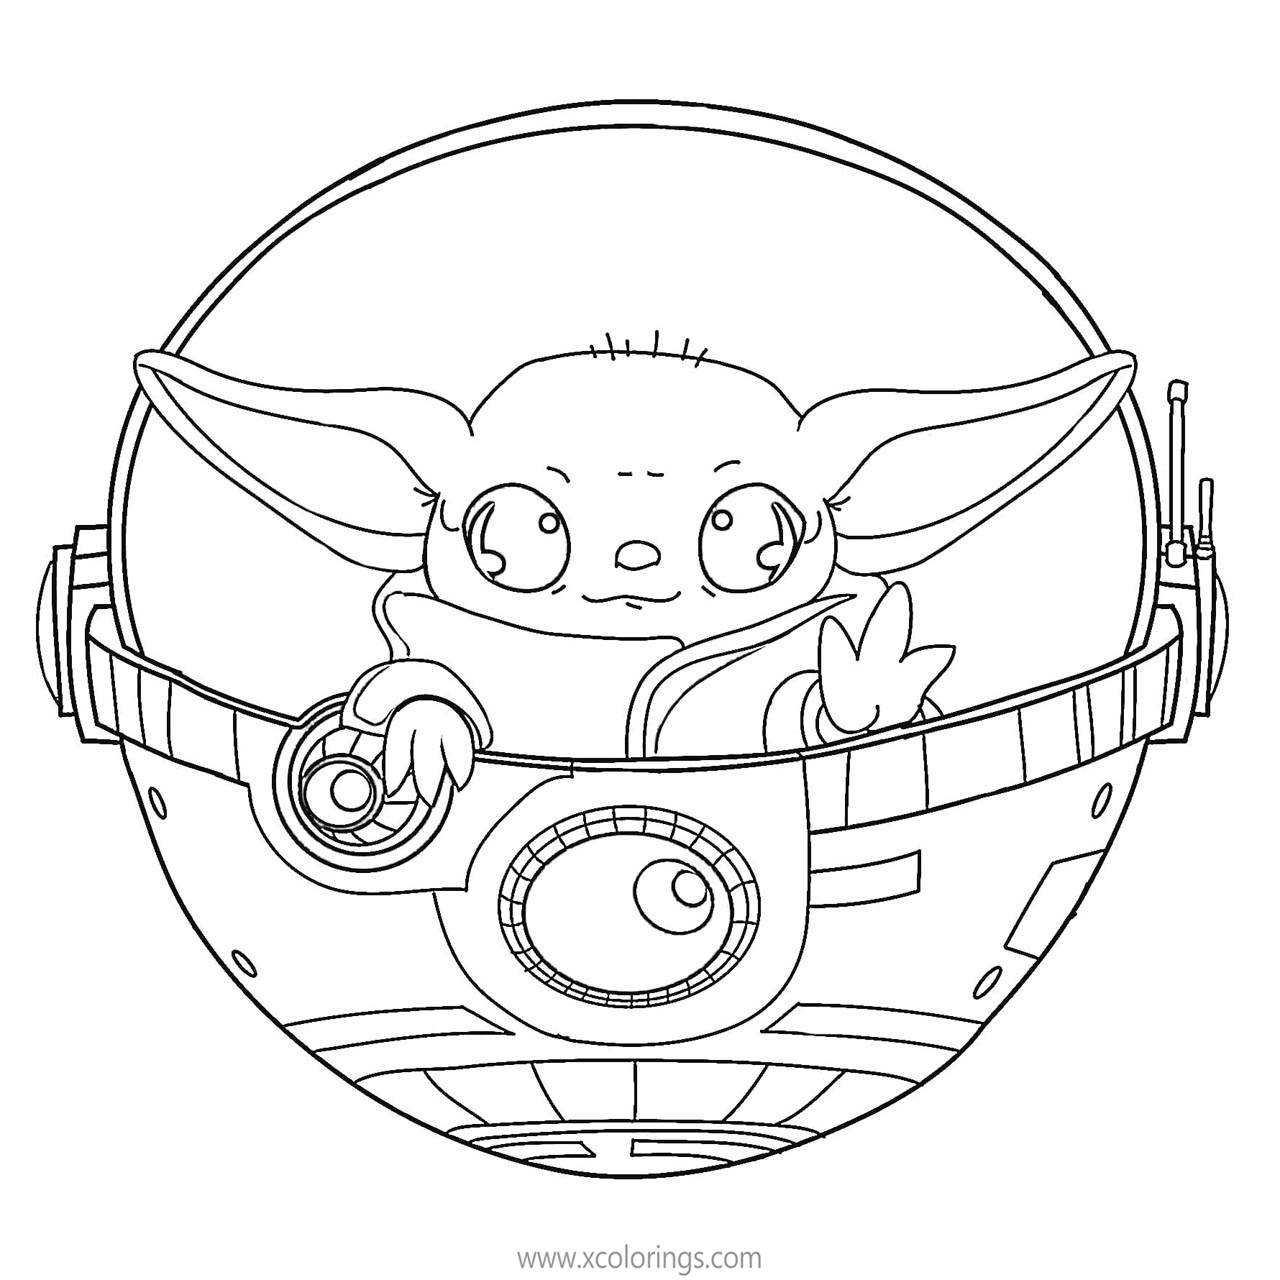 Free Baby Yoda in Spaceship Coloring Pages printable